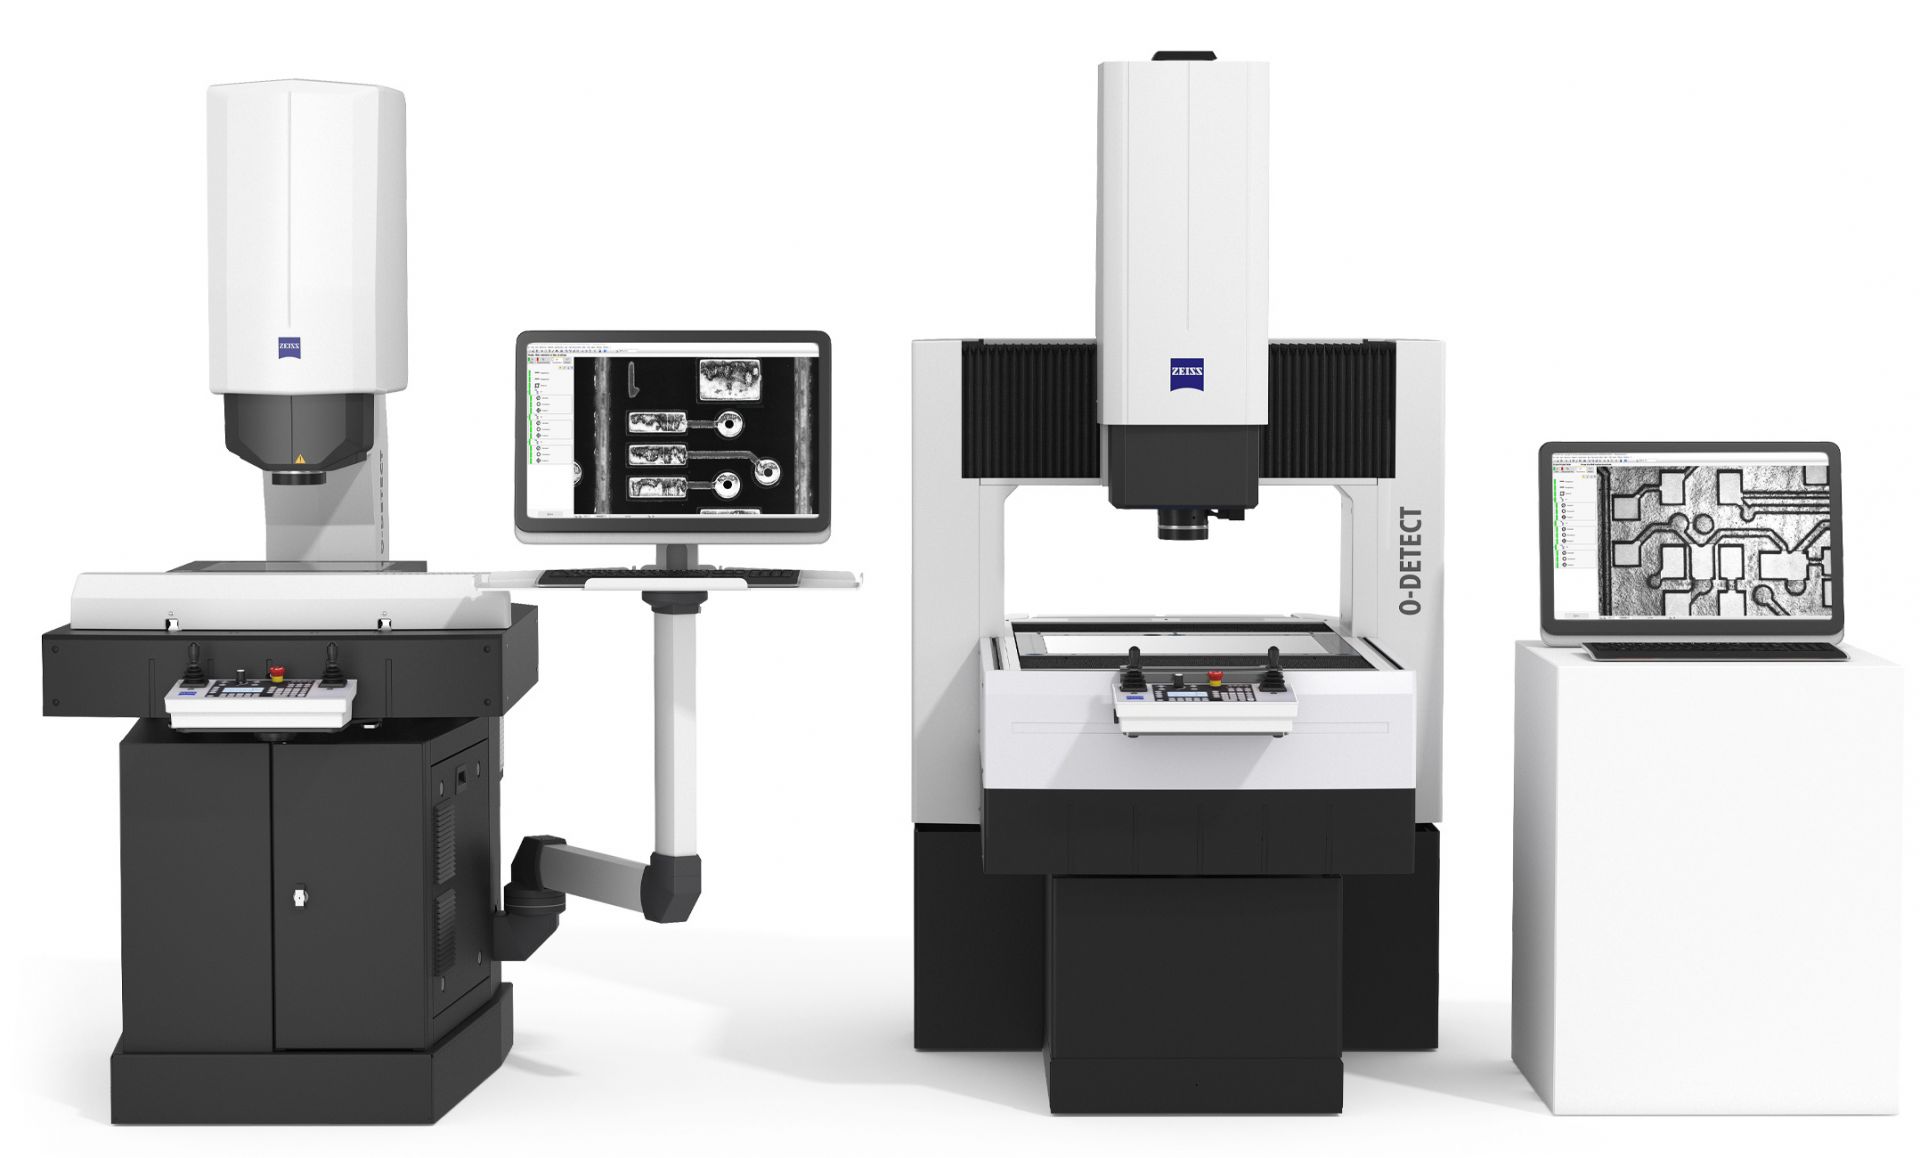 Devices in the ZEISS Optical Series: ZEISS O-DETECT 3/2/2 and on the right the new size O-DETECT 5/4/3